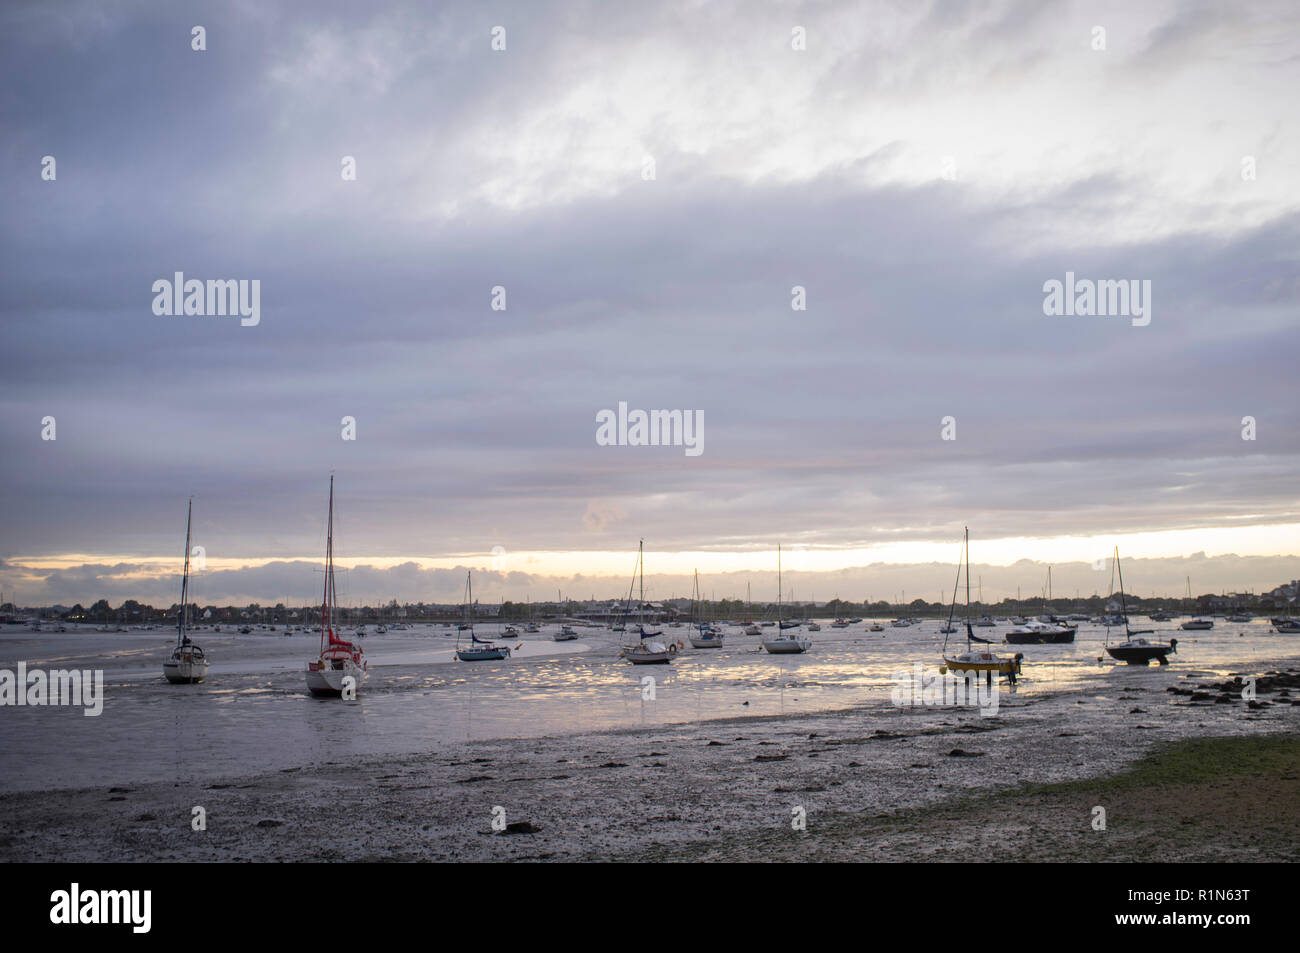 Yachts moored in the estuary of the River Blackwater at low tide in Maldon, Essex Stock Photo